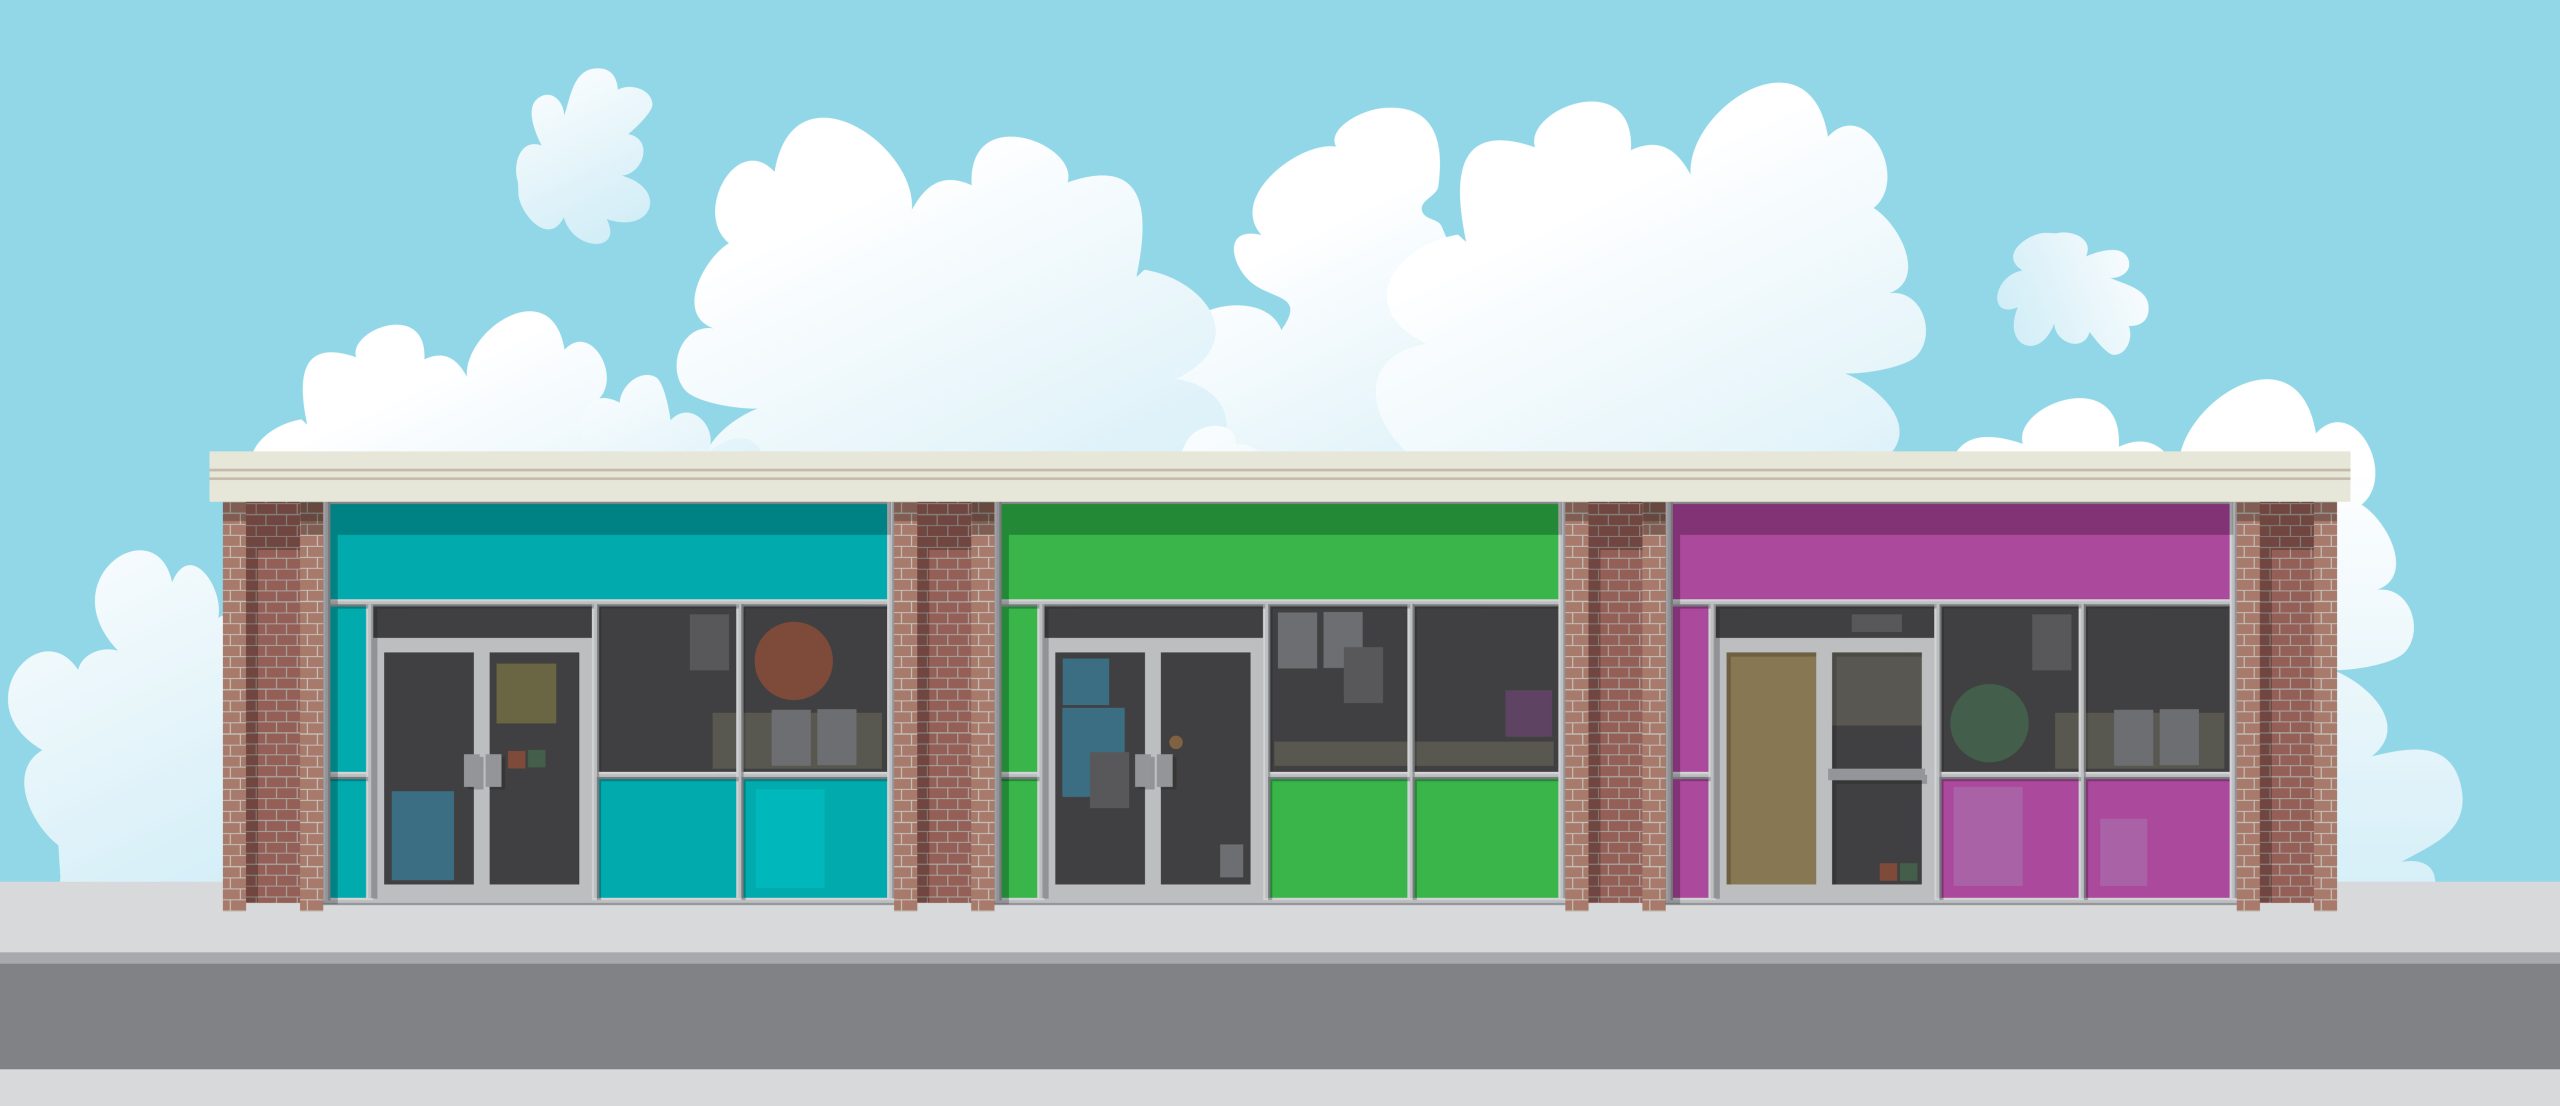 Strip mall illustration with three businesses in blue, green, and pink